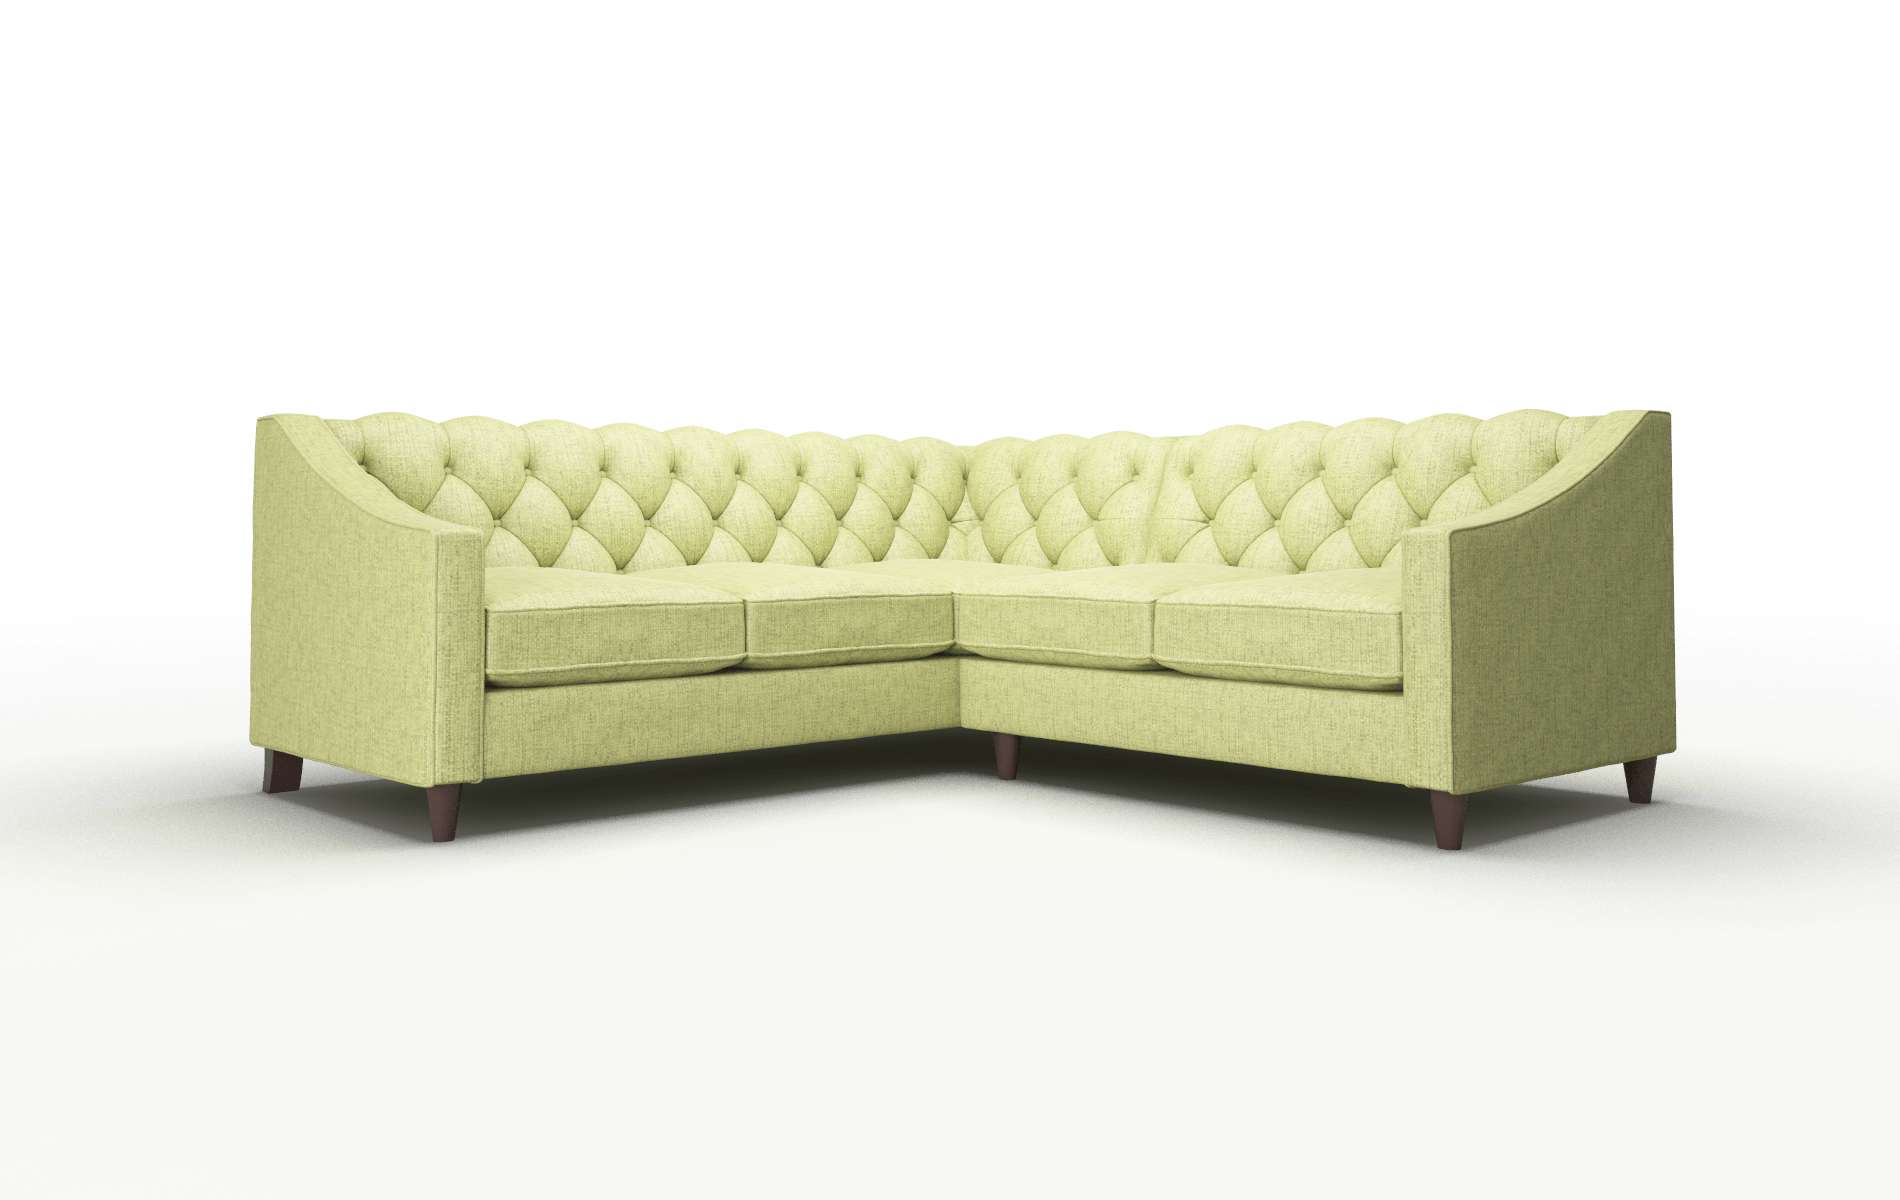 Manchester Notion Appletini Sectional espresso legs 1